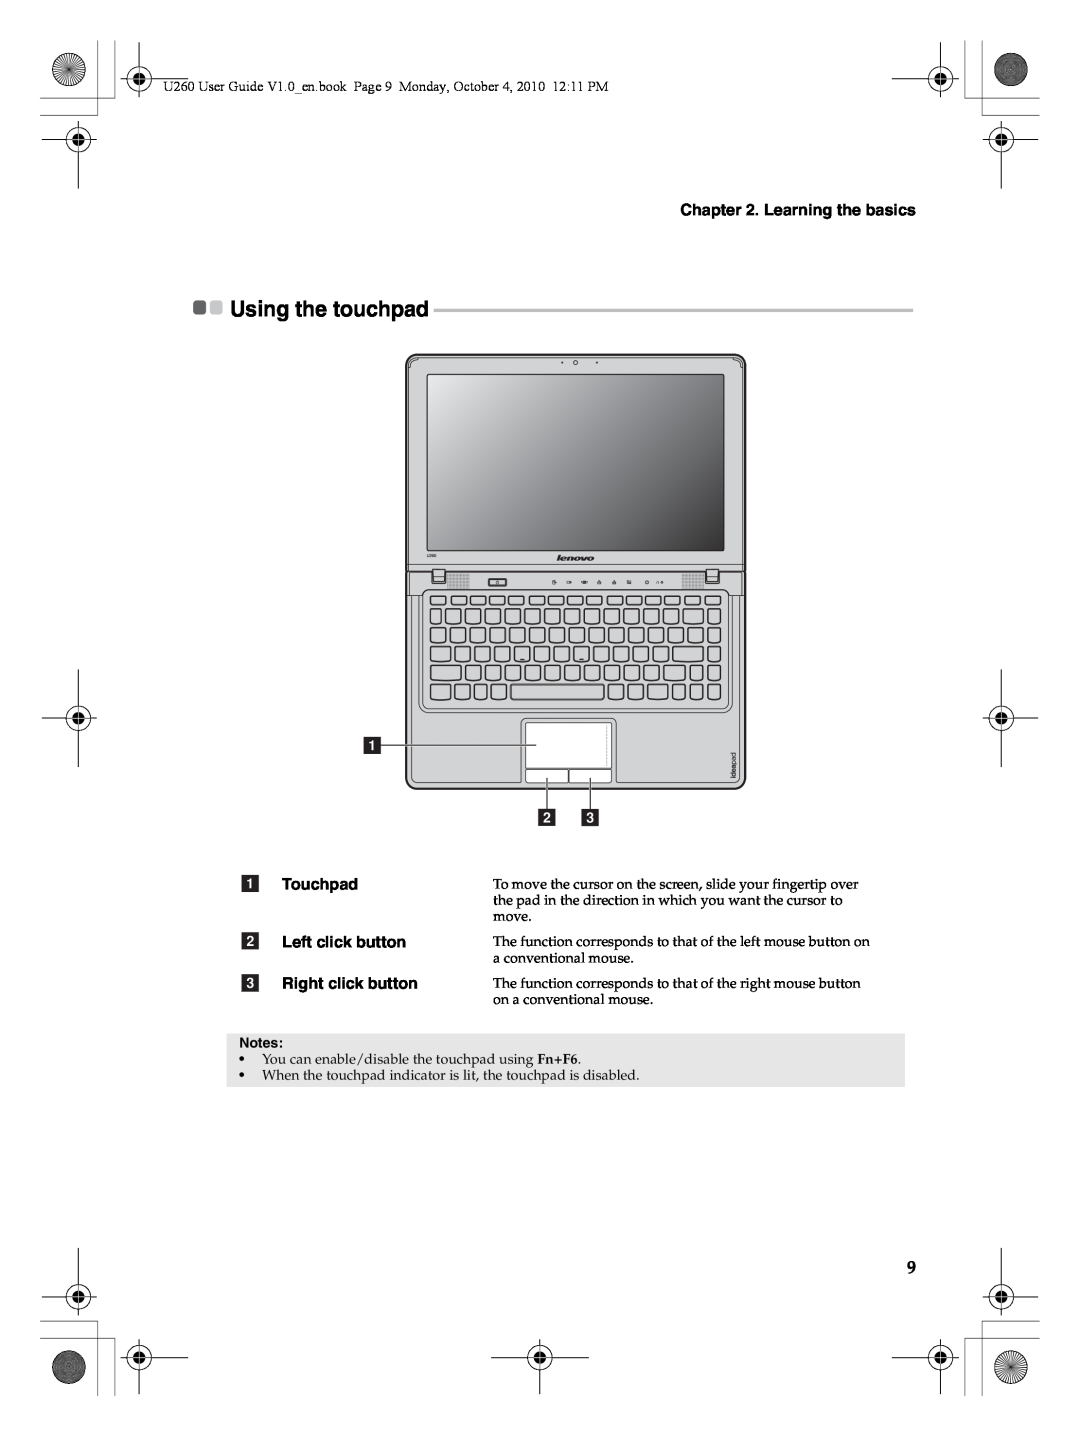 Lenovo U260 manual Using the touchpad, Learning the basics, Touchpad, Left click button, Right click button 